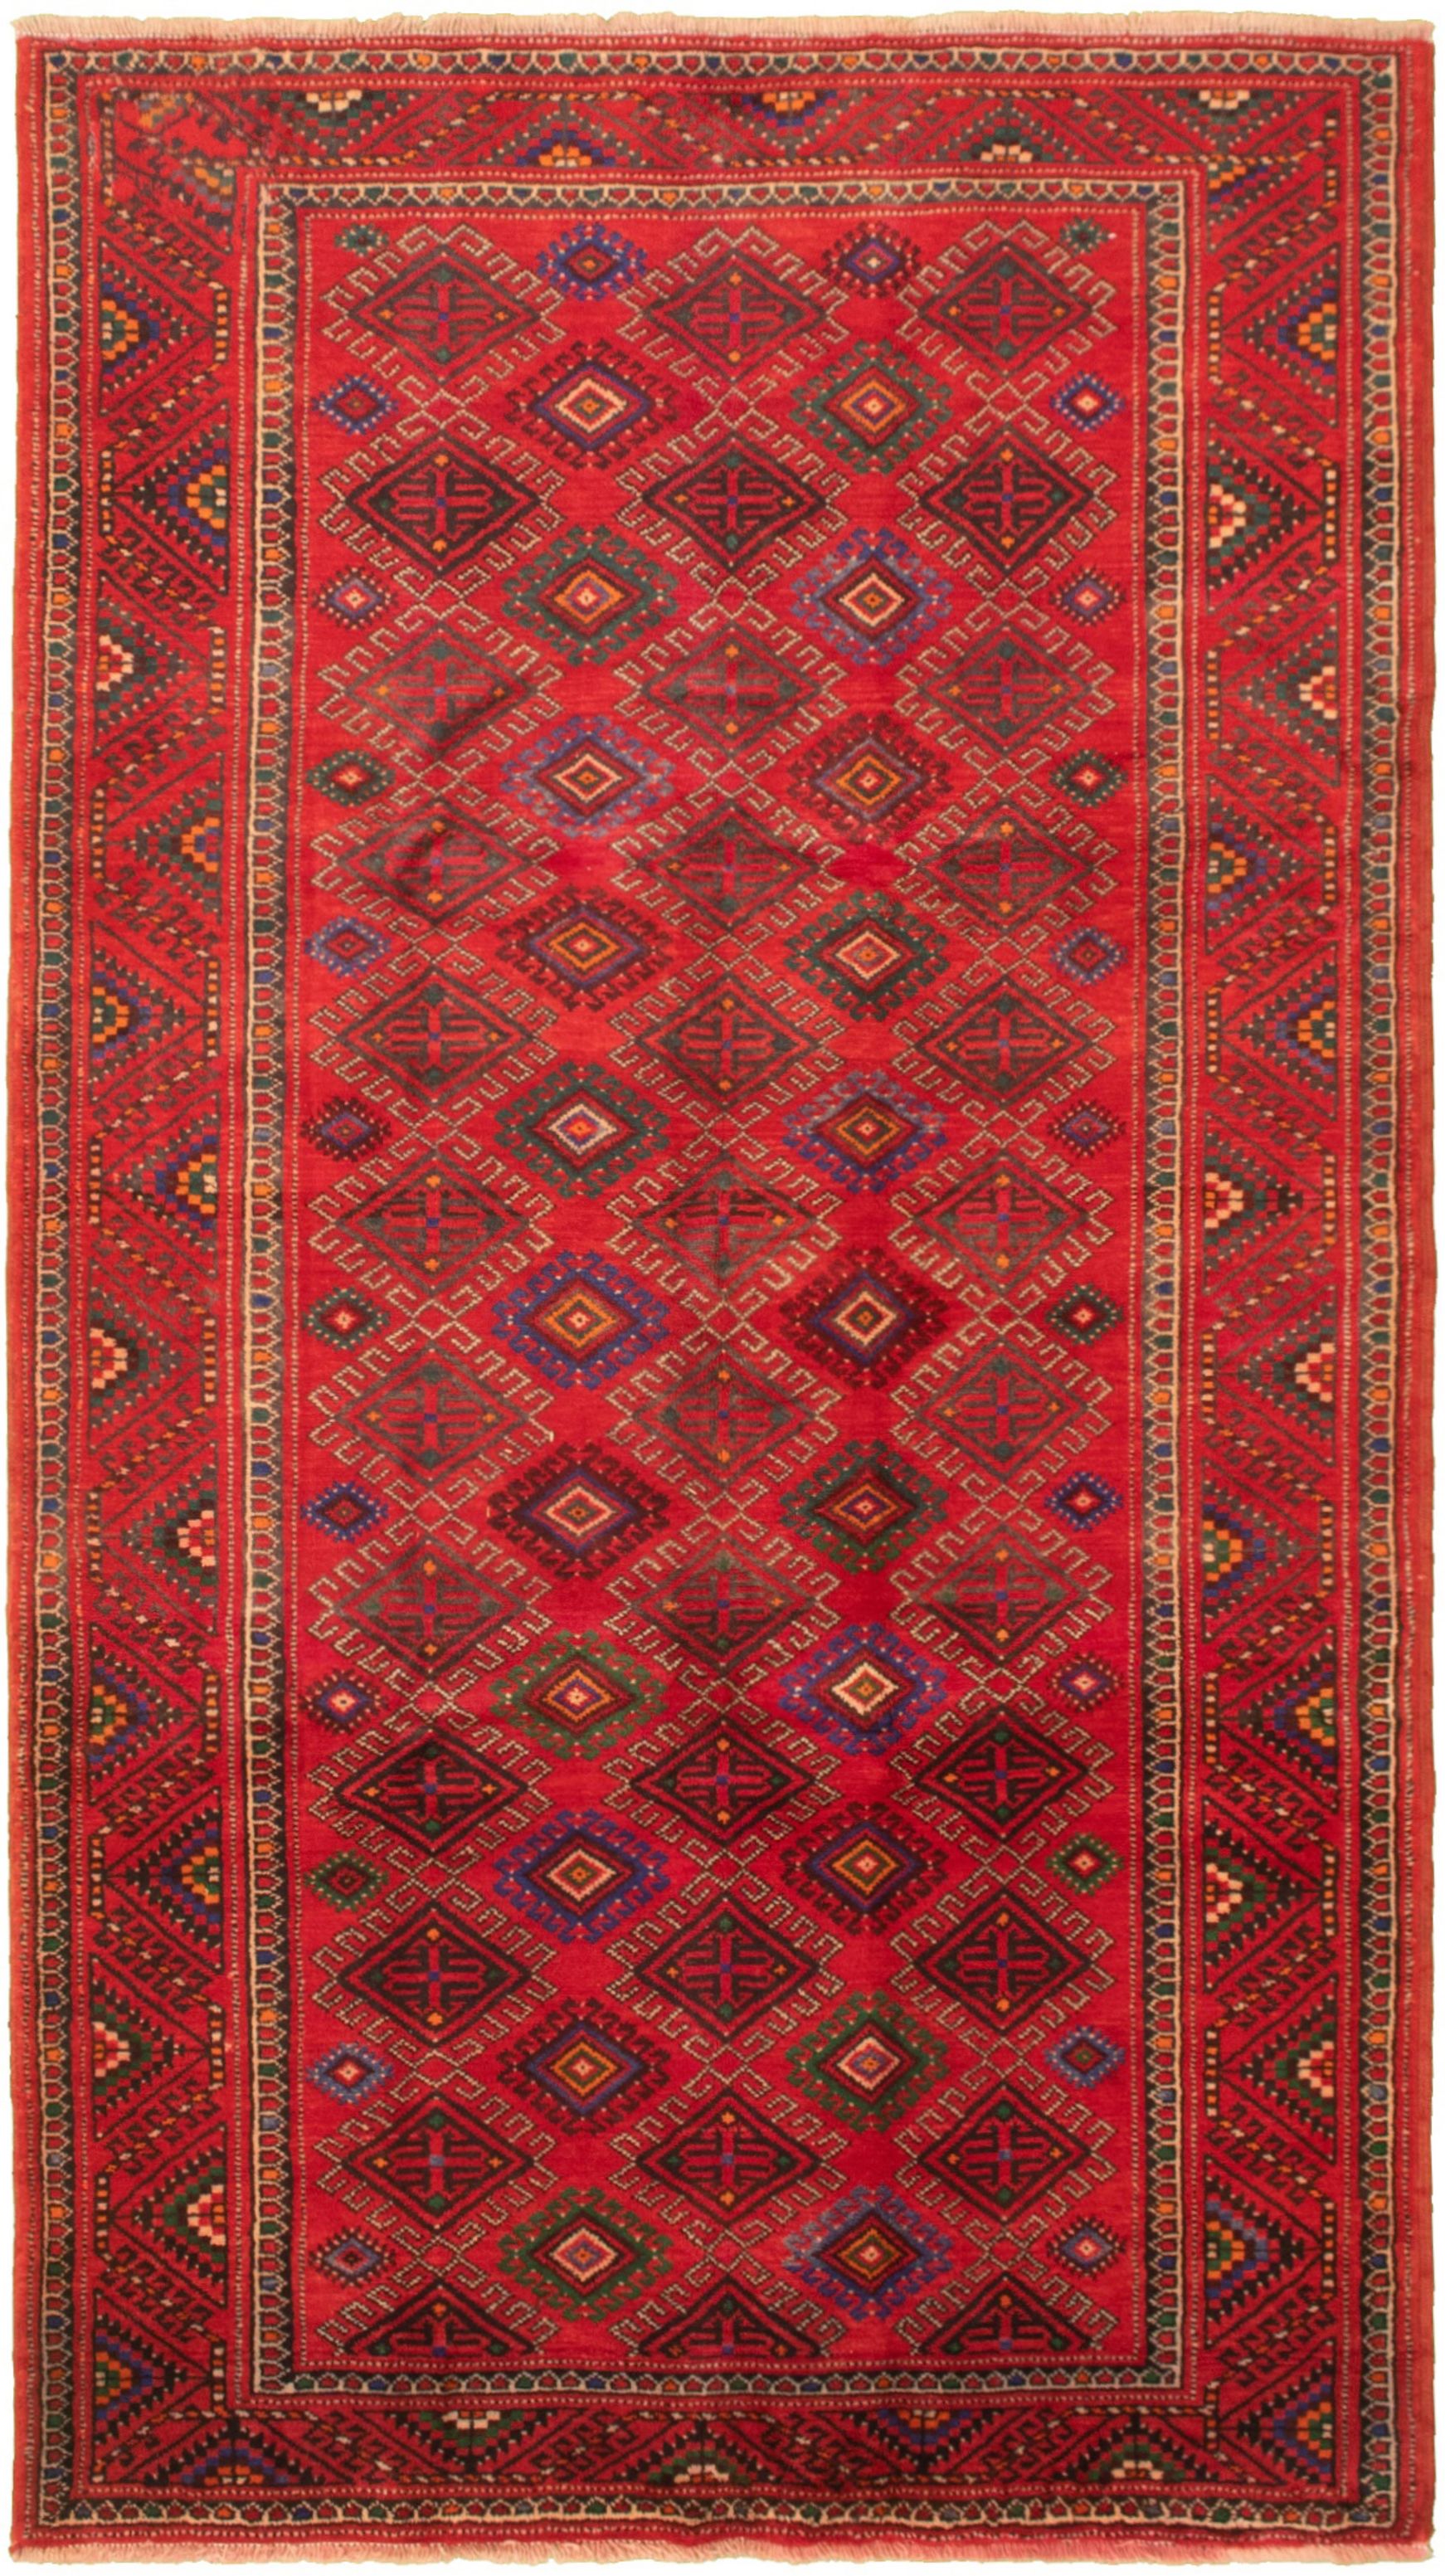 Hand-knotted Authentic Turkish Red Wool Rug 5'2" x 9'9"  Size: 5'2" x 9'9"  